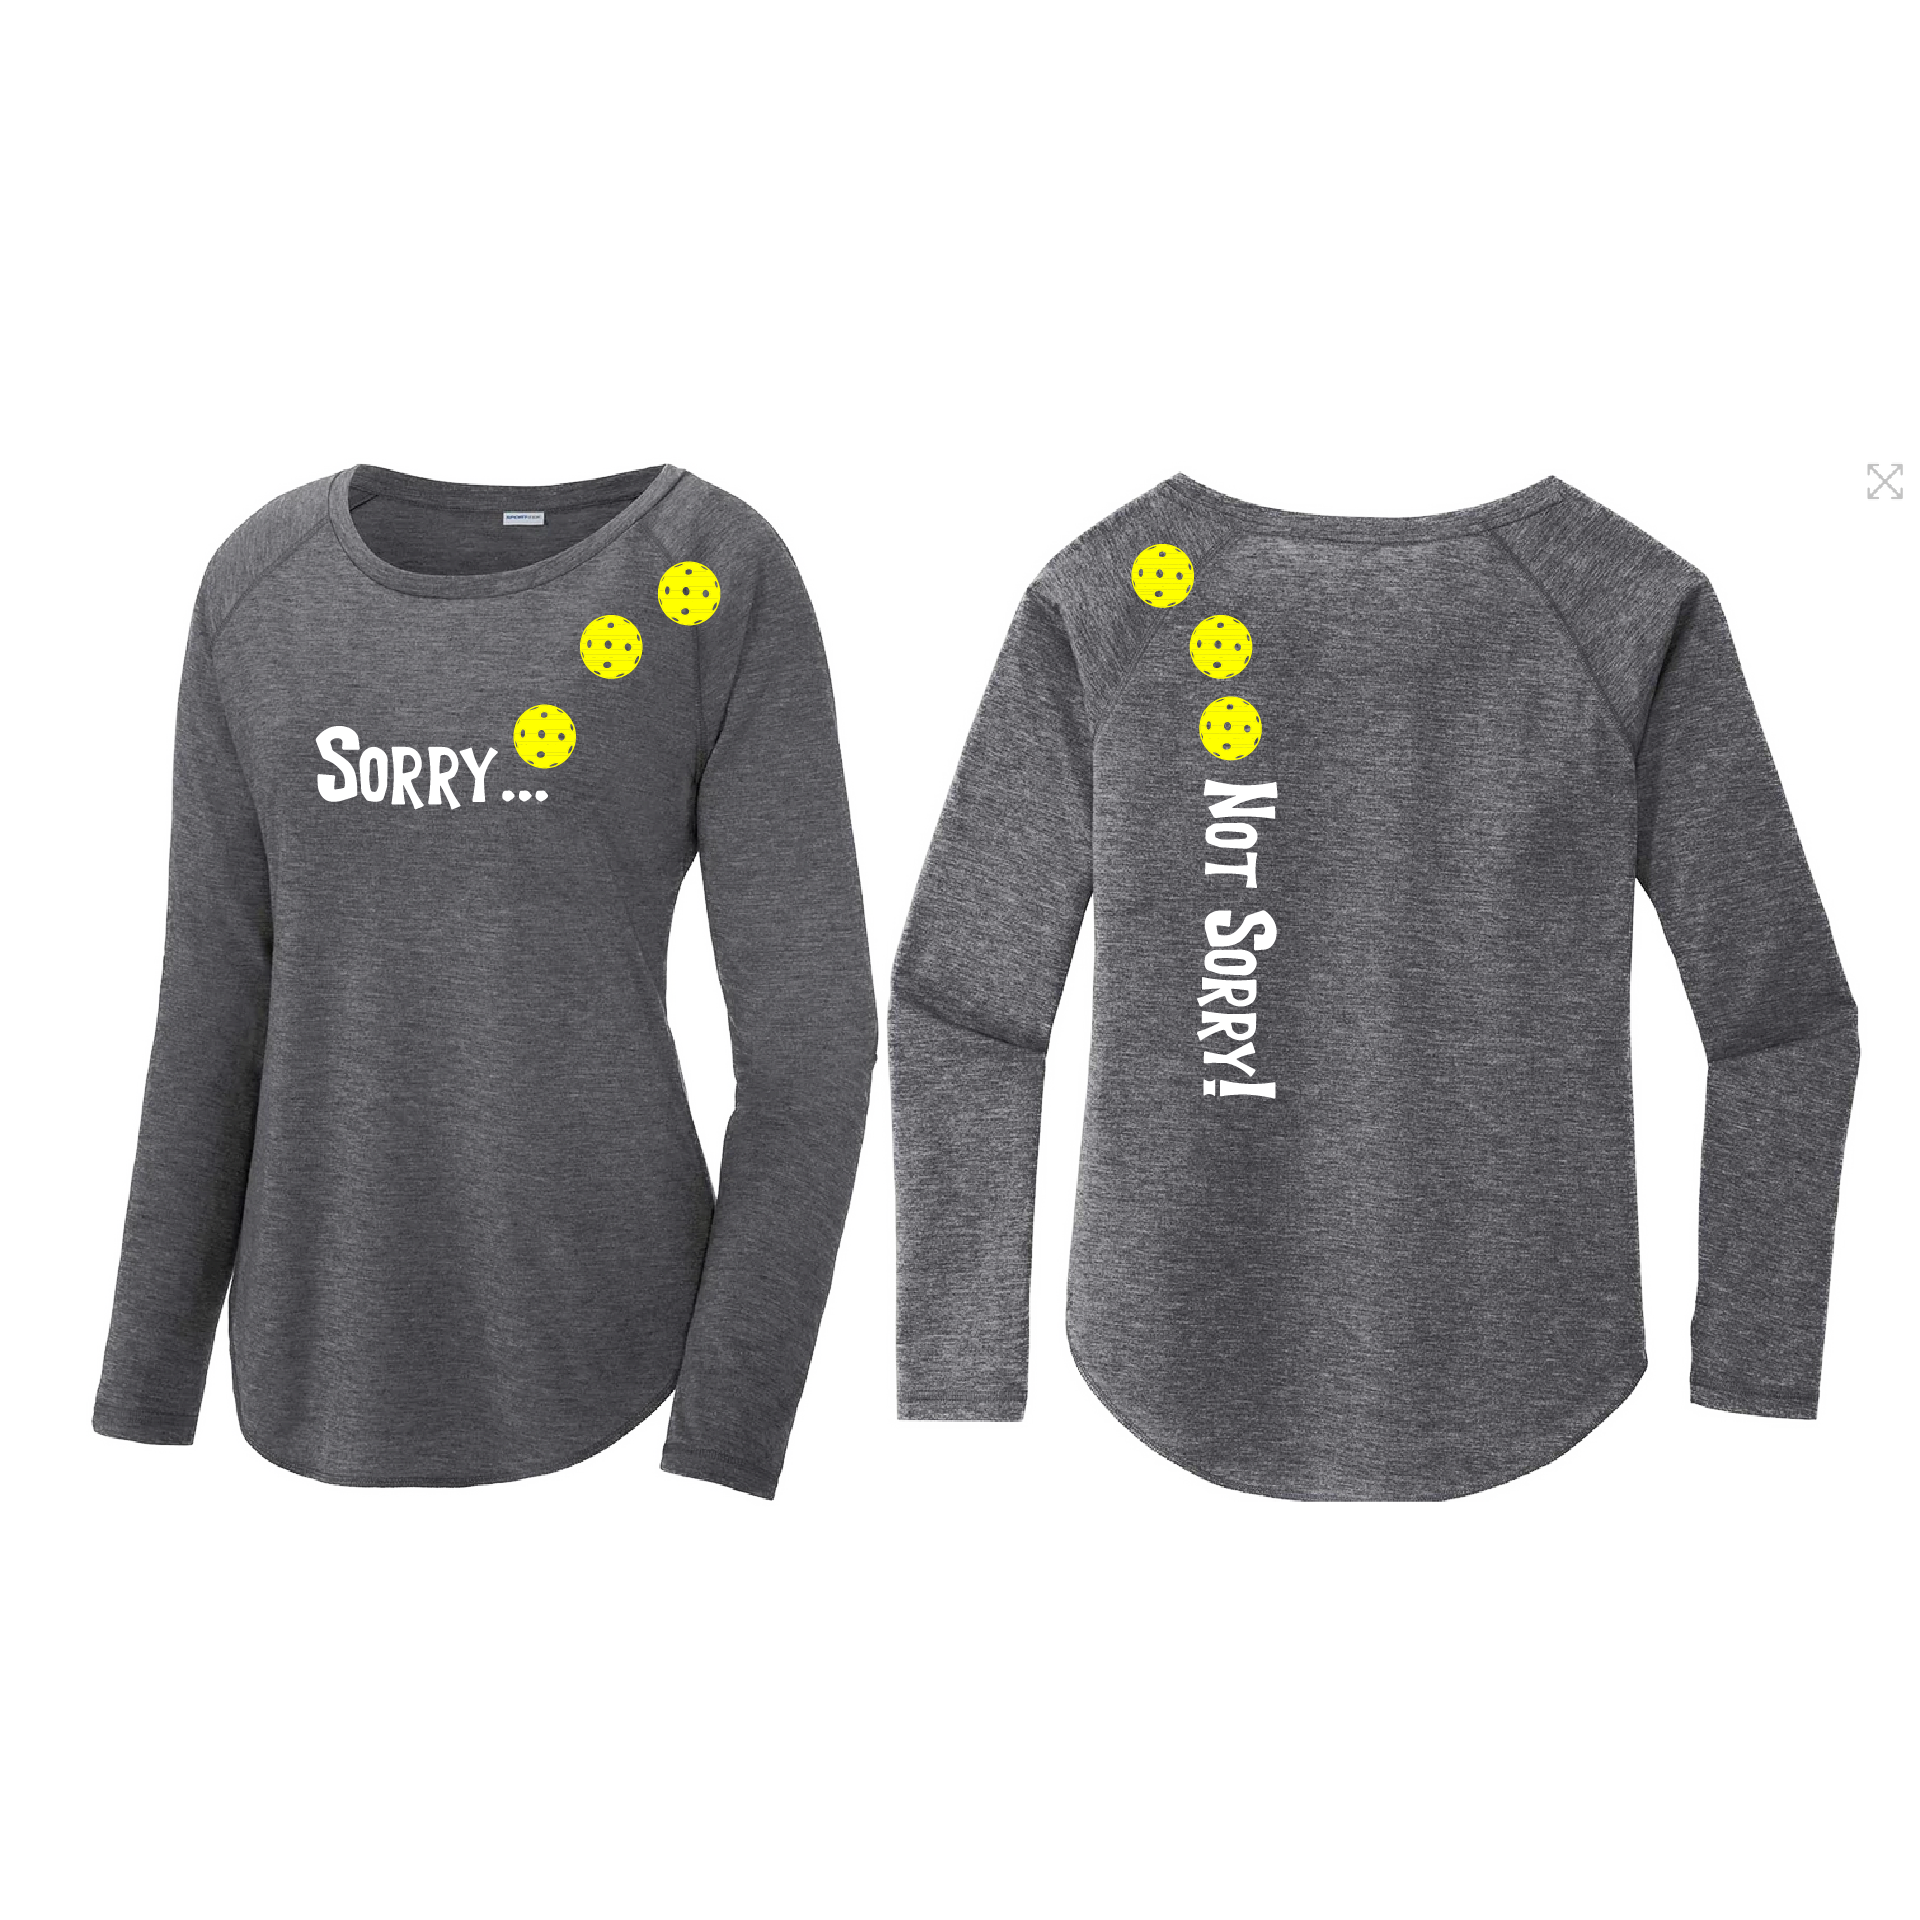  Pickleball Design: Sorry...Not Sorry with Customizable Ball Color – White, Yellow or Pink Balls Women's Styles: Long-Sleeve Scoop-Neck Turn up the volume in this Women's shirt with its perfect mix of softness and attitude. Material is ultra-comfortable with moisture wicking properties and tri-blend softness. PosiCharge technology locks in color. Highly breathable and lightweight.